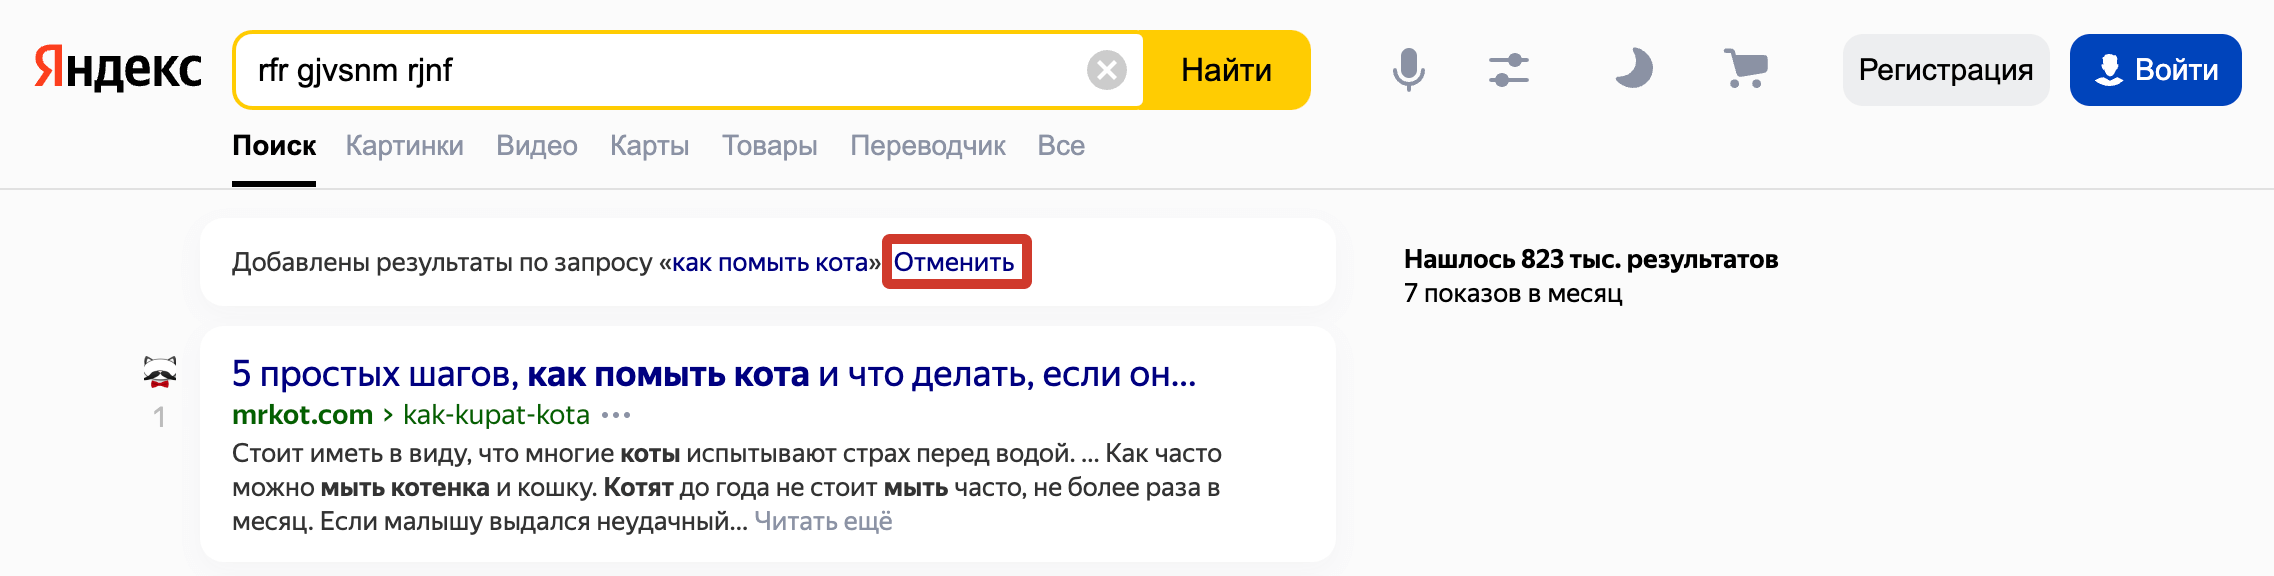 Yandex mismatch: How to disable spellchecking in Yandex